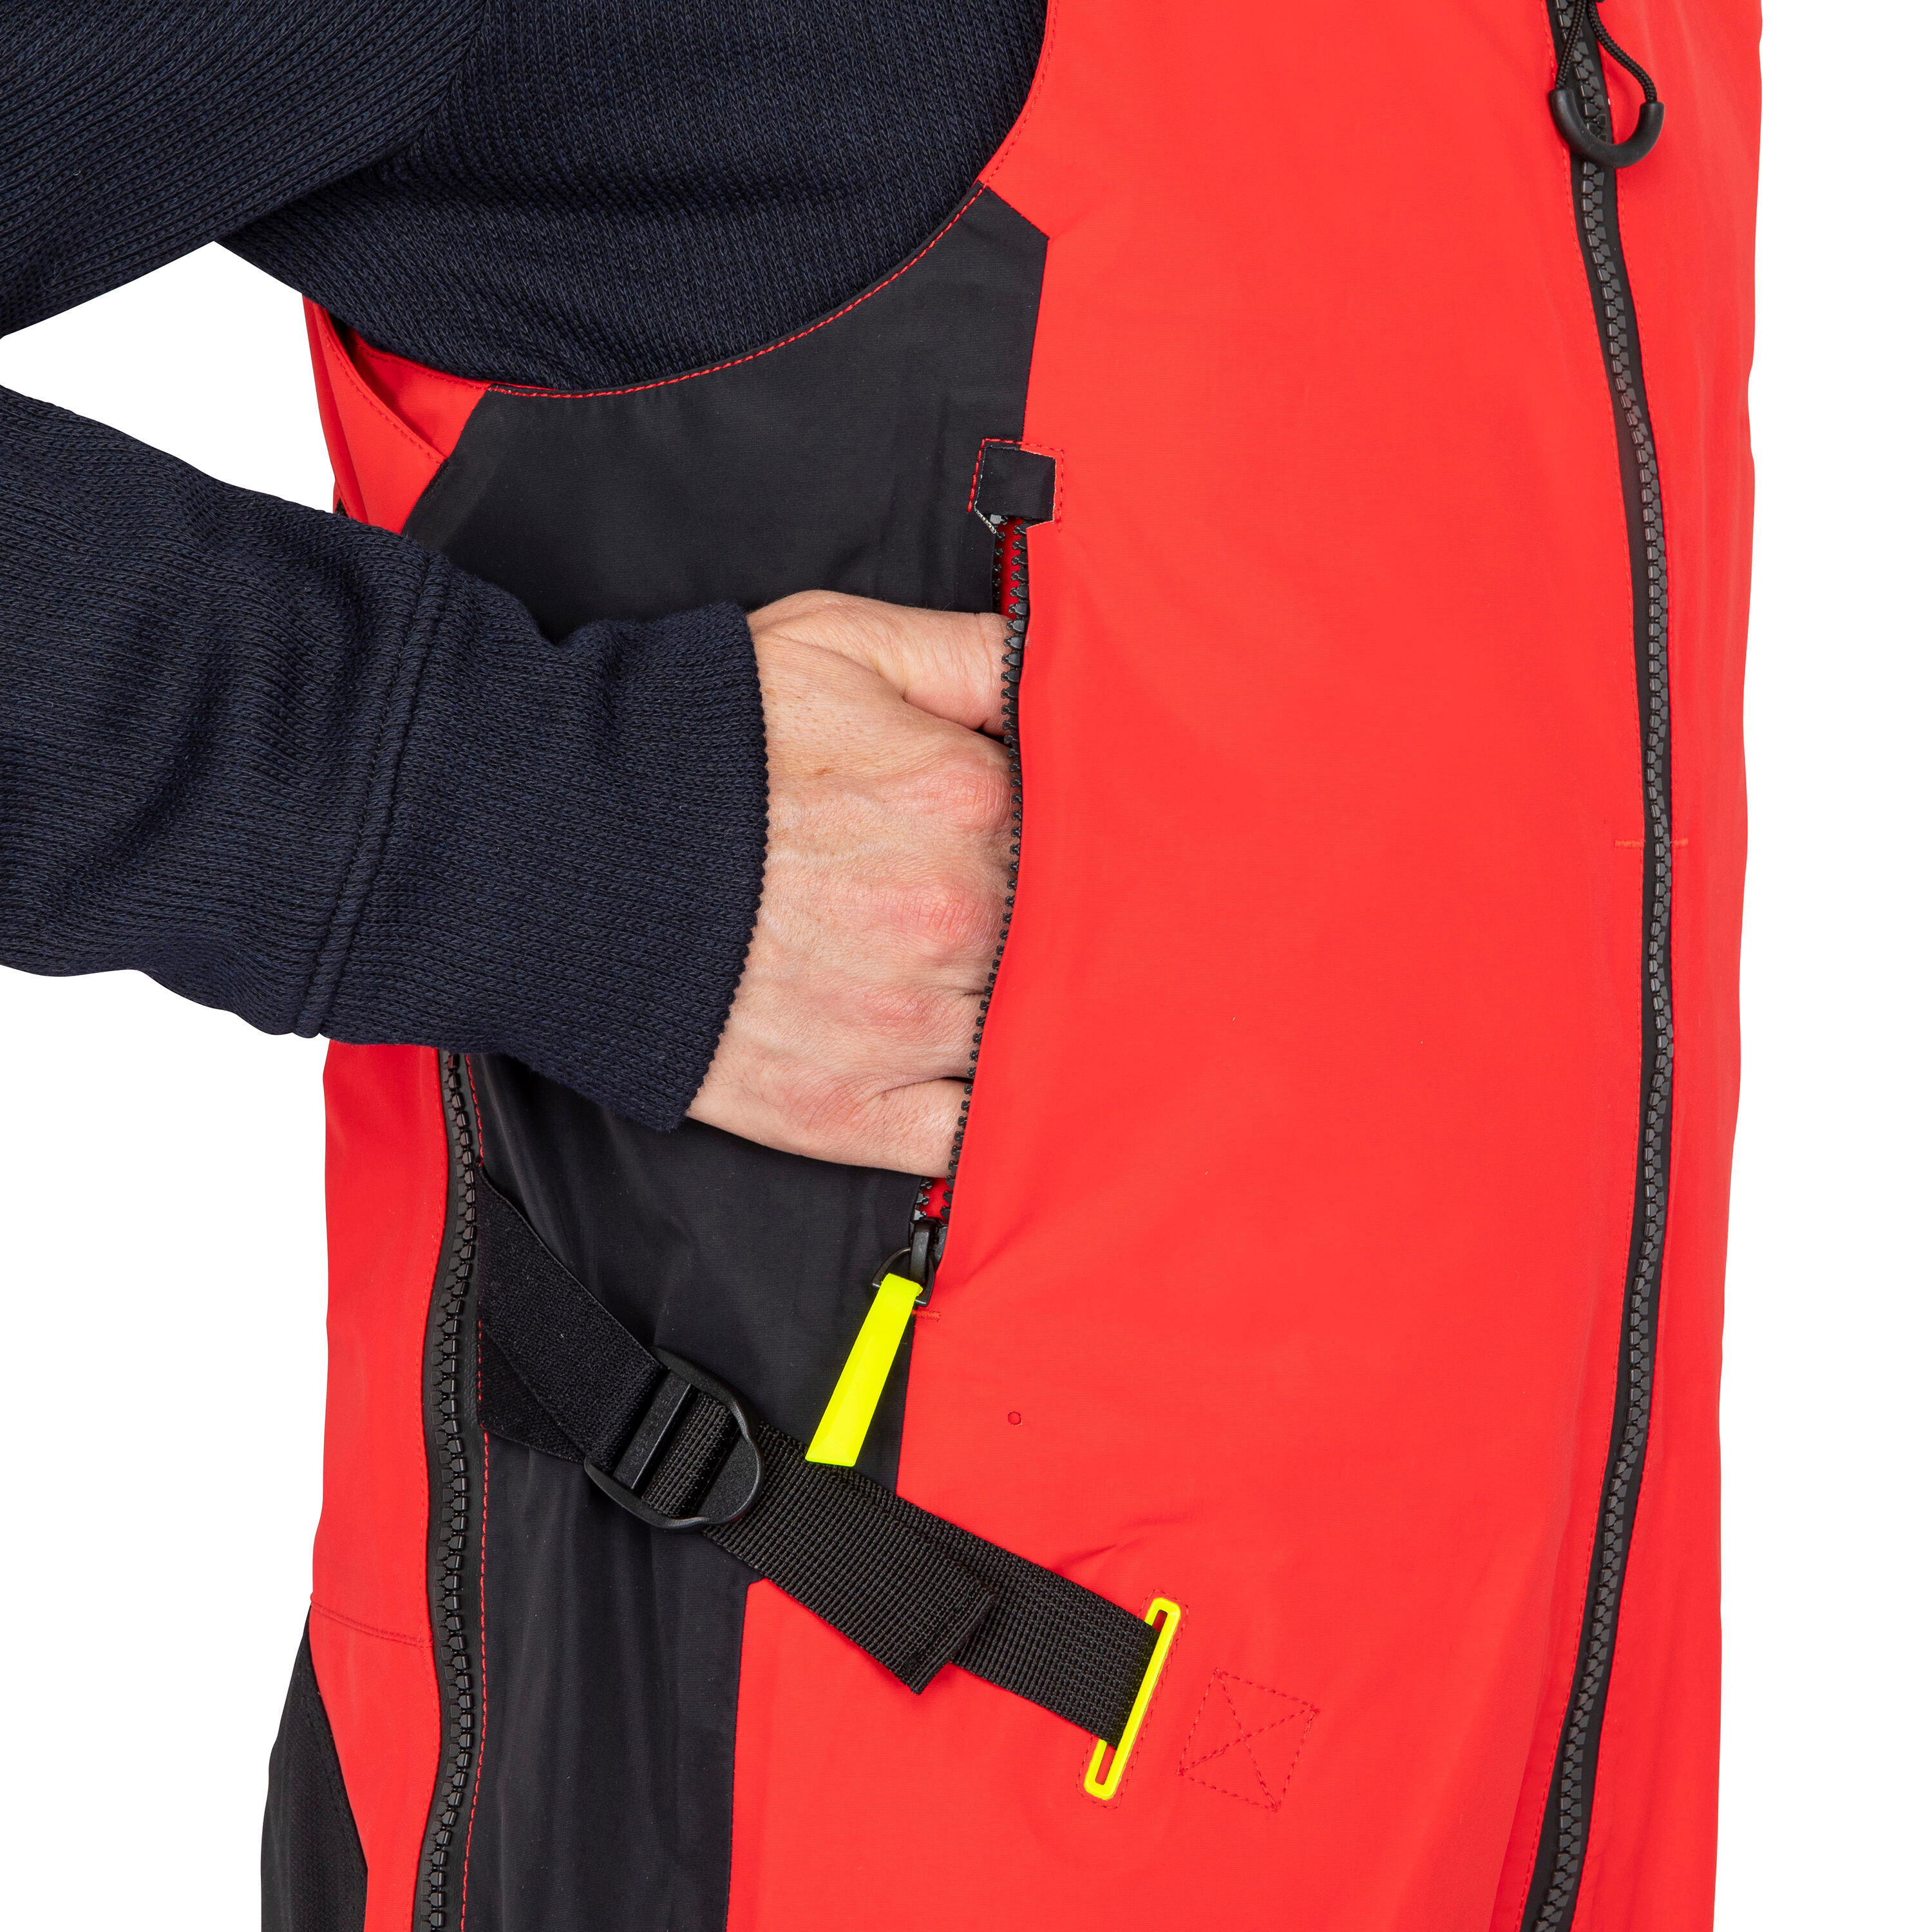 Adult Sailing overalls - Offshore 900 OPEN dropseat red 9/16